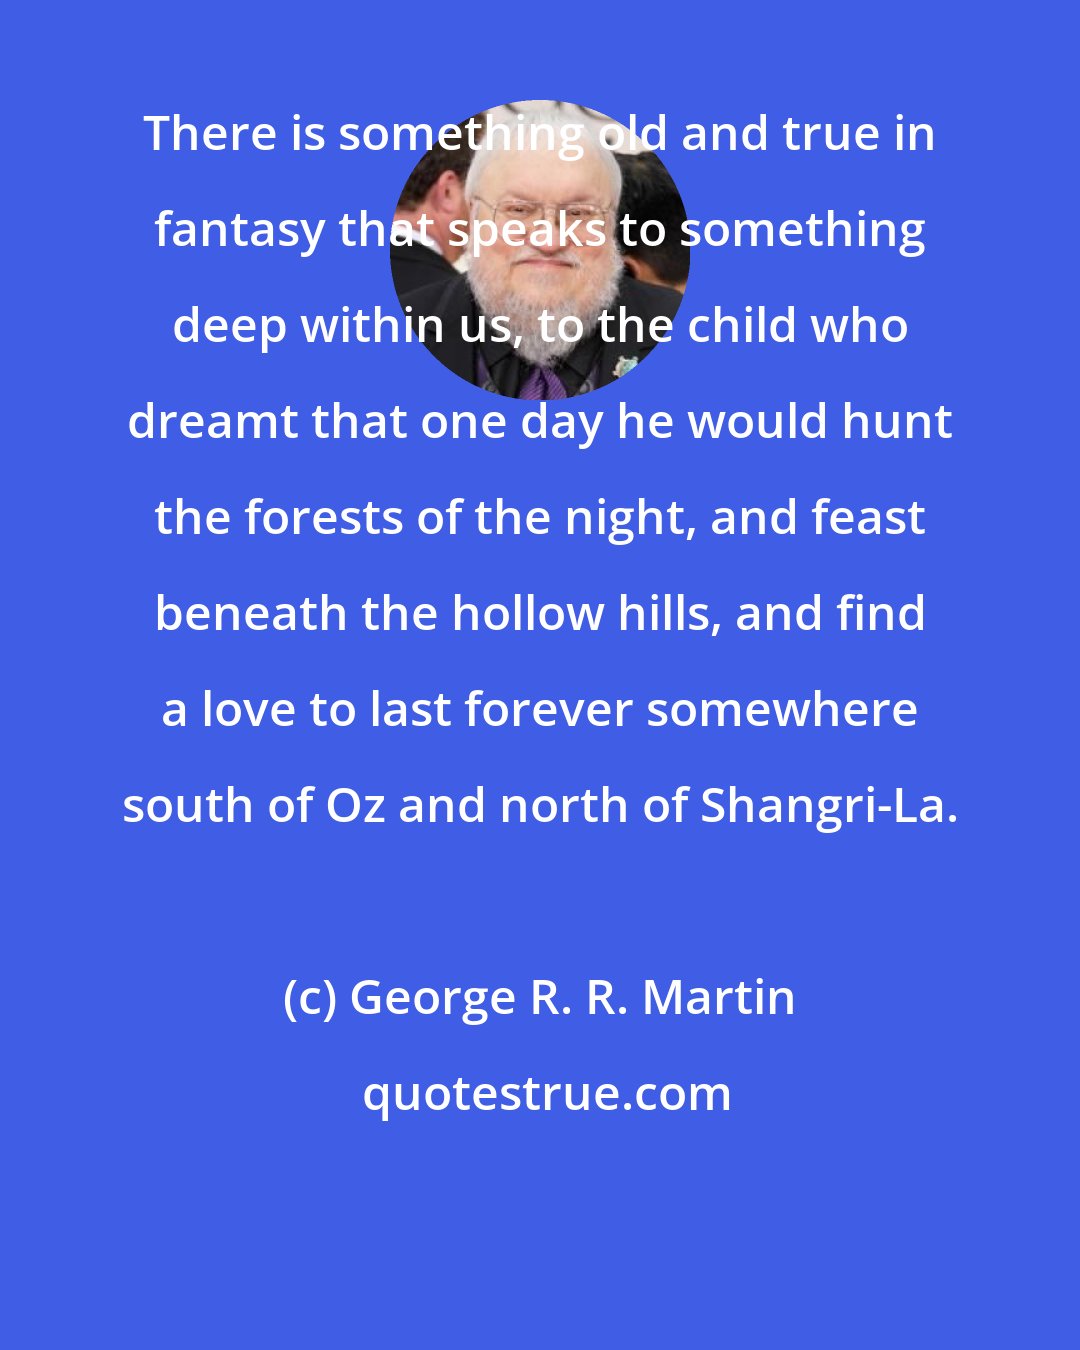 George R. R. Martin: There is something old and true in fantasy that speaks to something deep within us, to the child who dreamt that one day he would hunt the forests of the night, and feast beneath the hollow hills, and find a love to last forever somewhere south of Oz and north of Shangri-La.